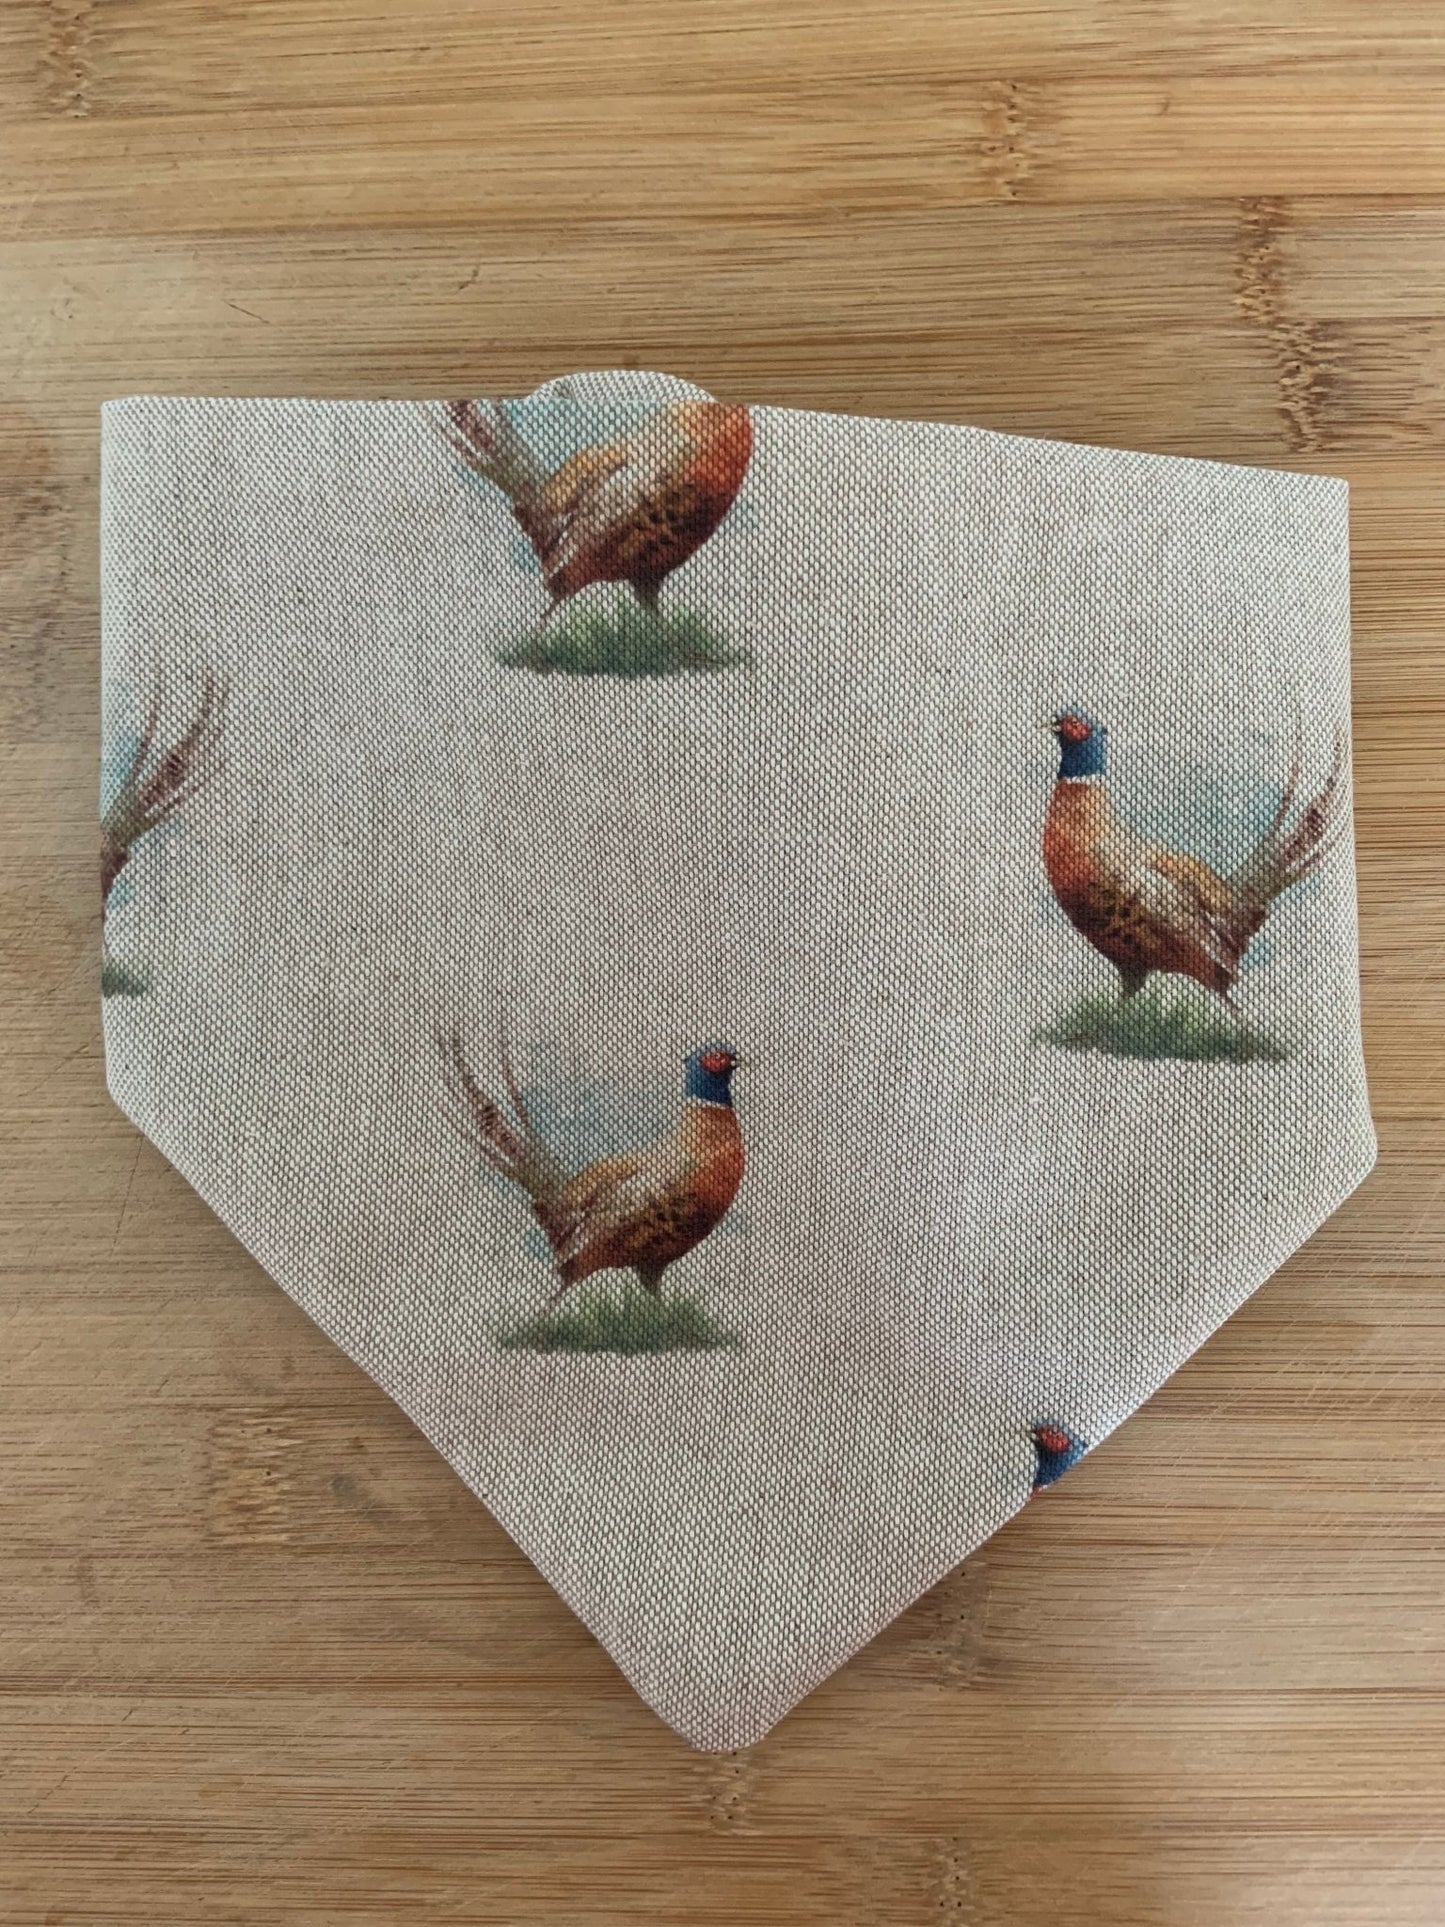 Country Pheasant - Pheasant - The Dotty Dog Co